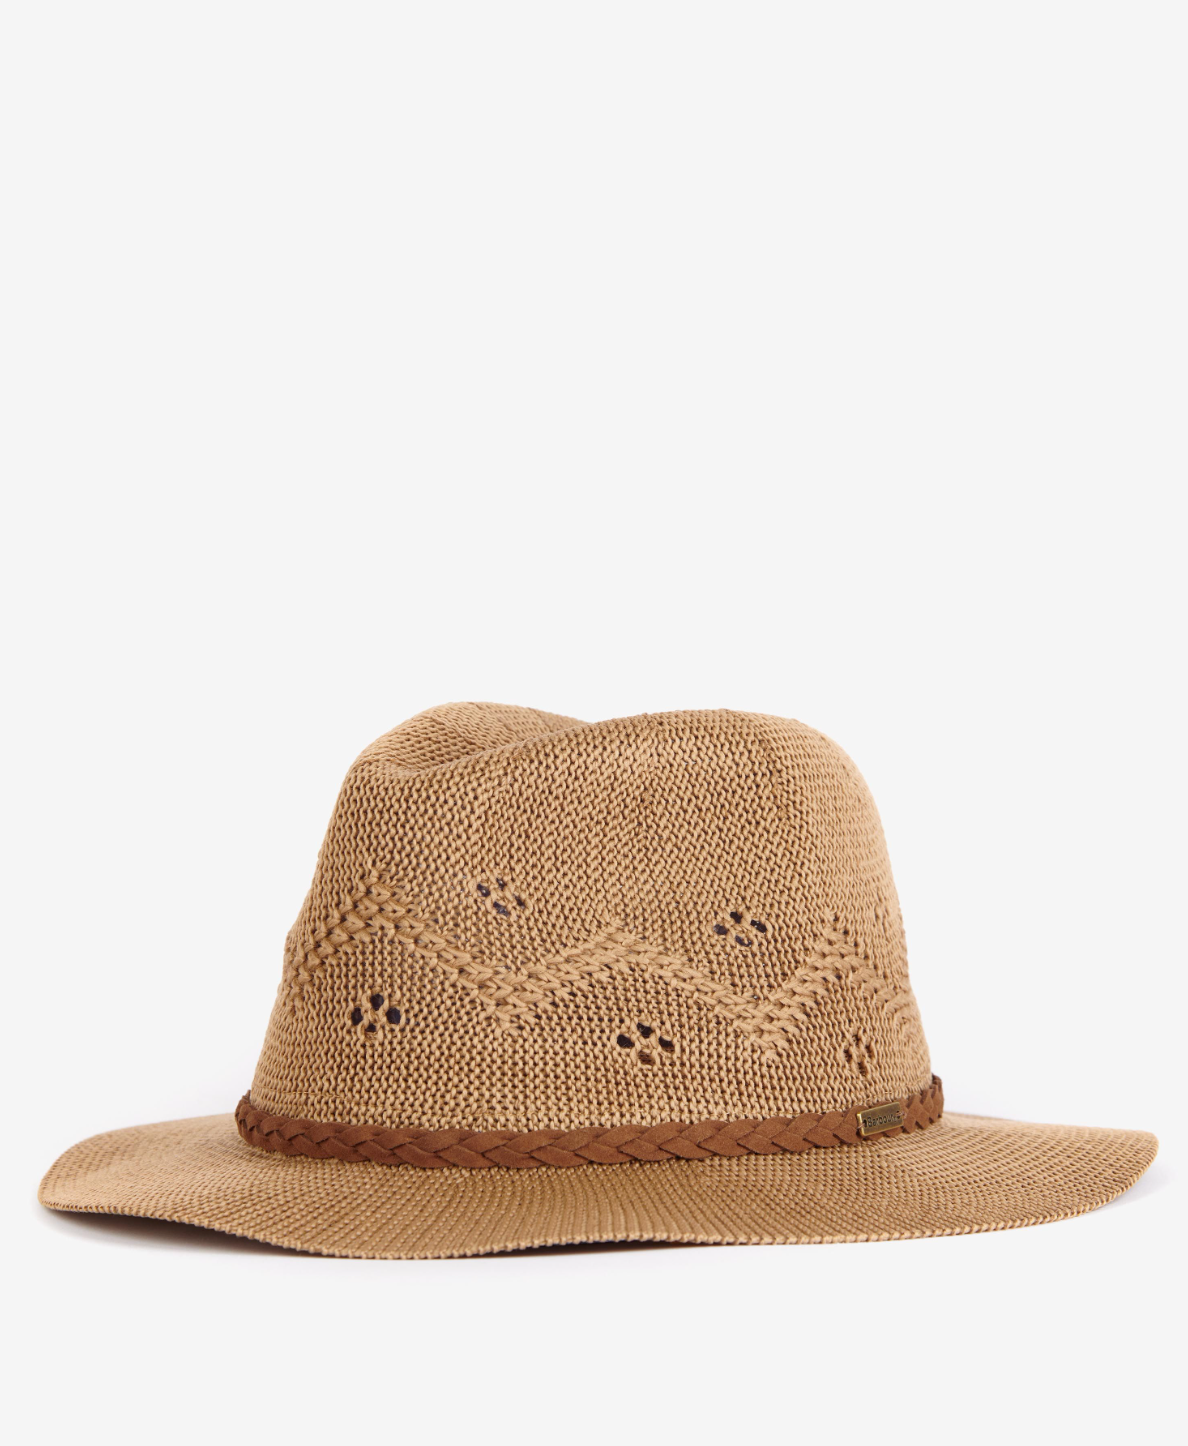 Barbour Women's Flowerdale Tribly Hat